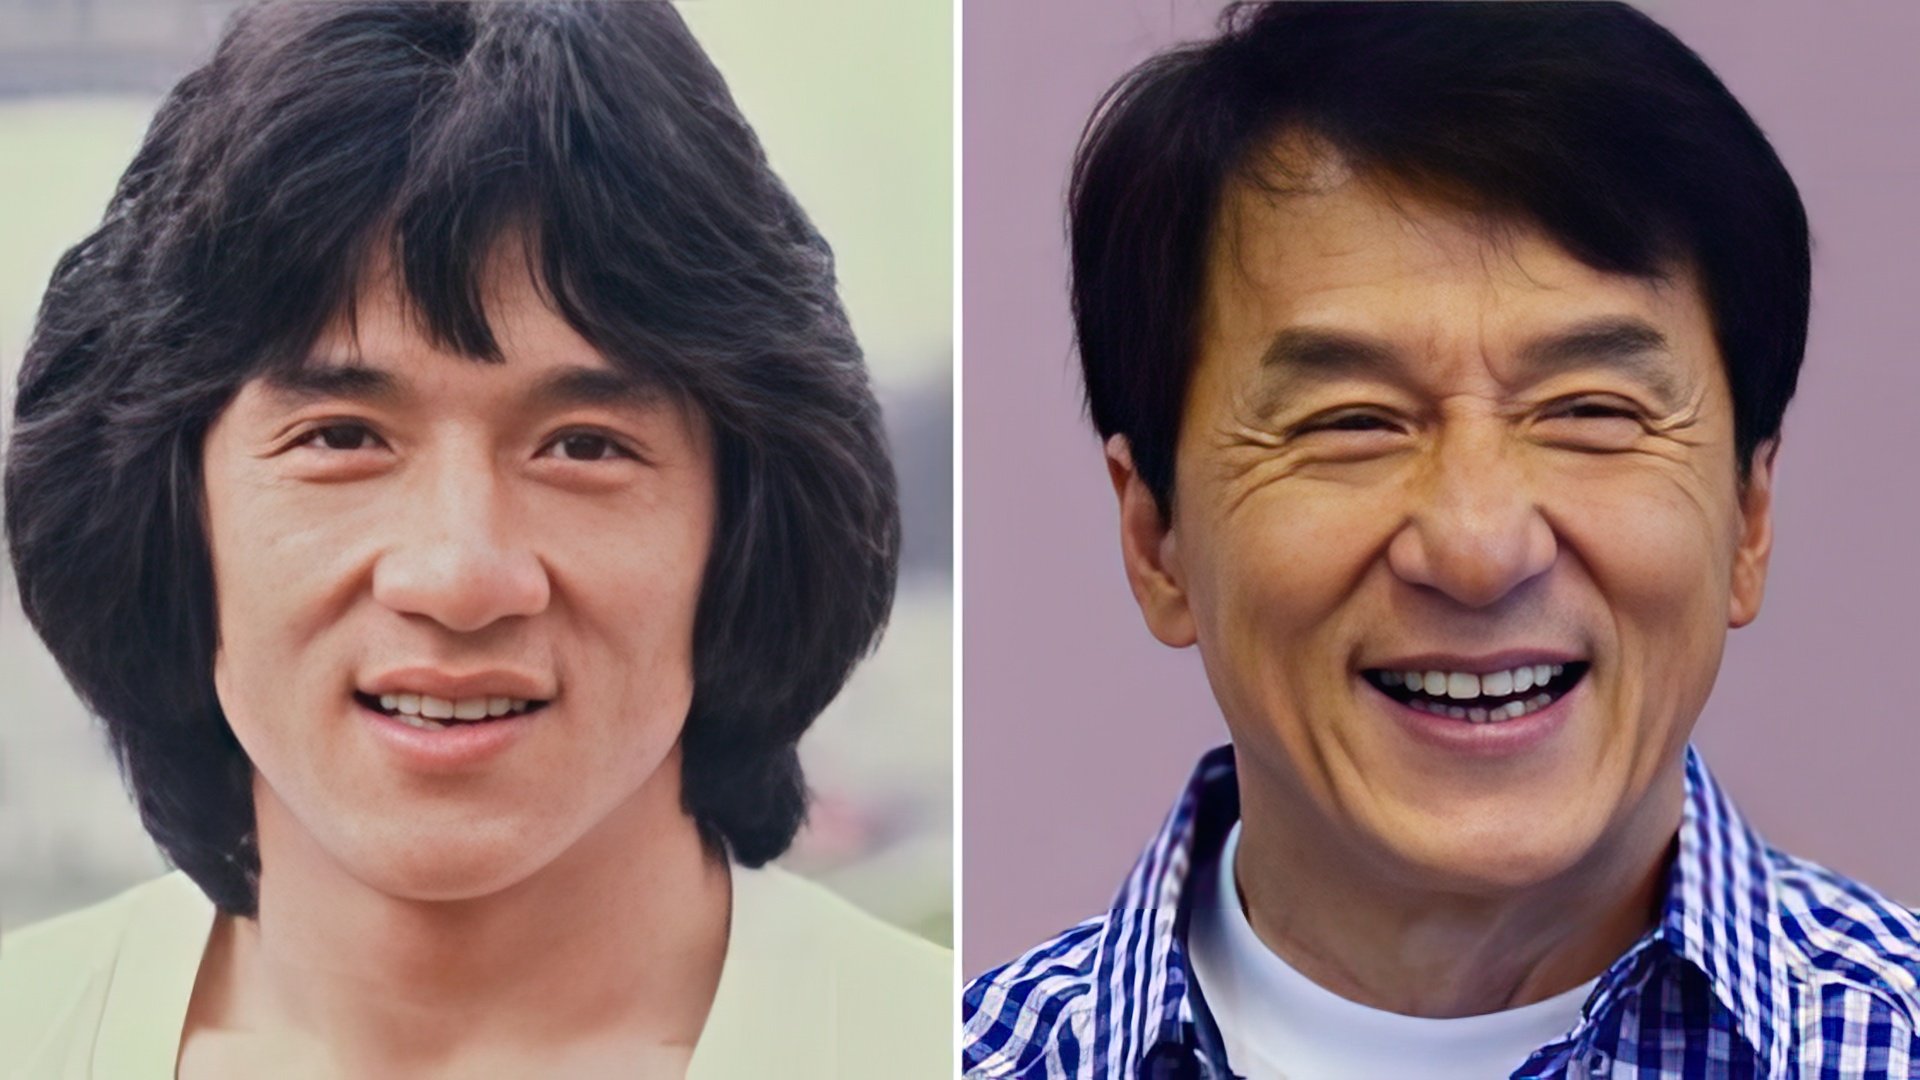 Jackie Chan in his youth and now (1981 VS 2015)